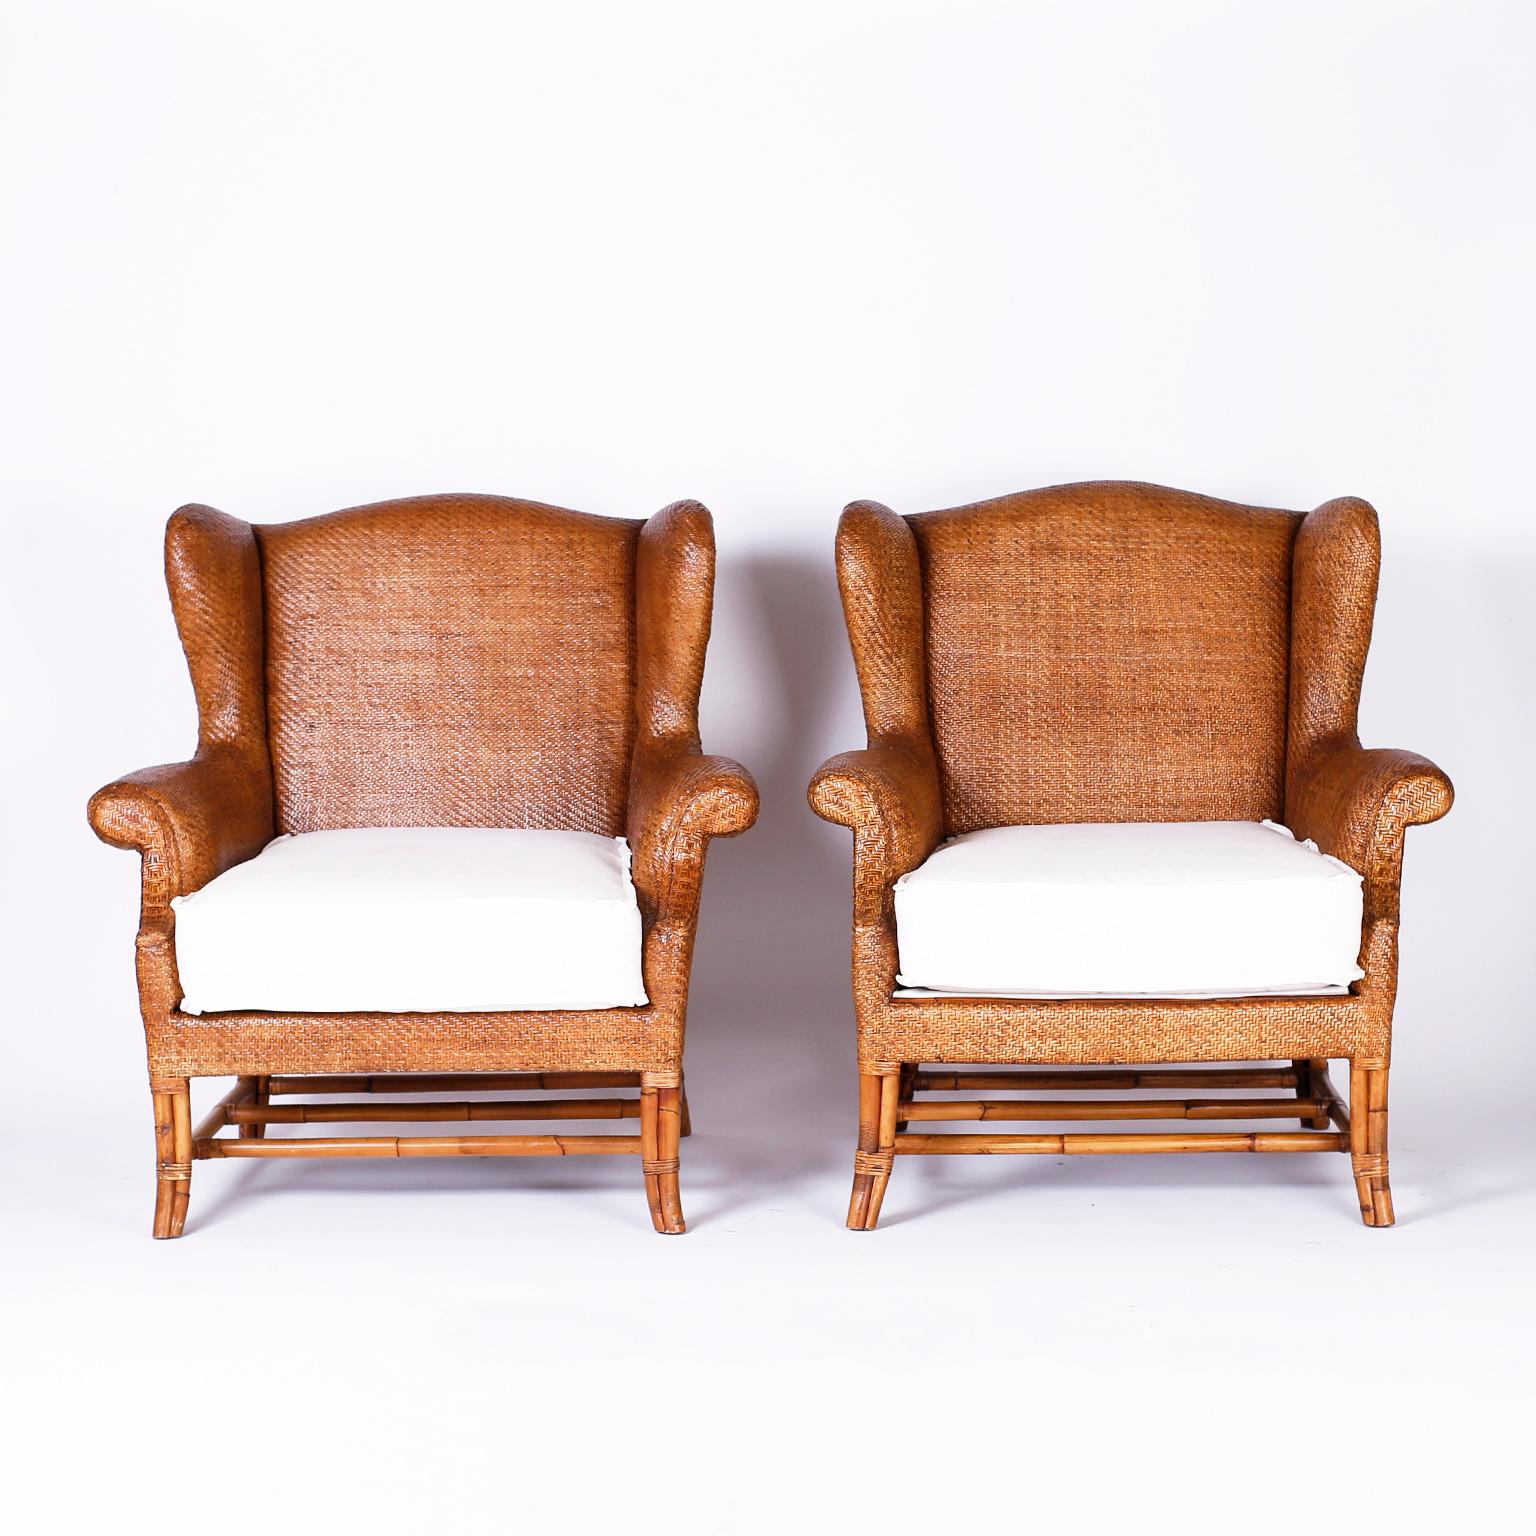 Pair of midcentury British colonial wing chairs with a classic form and bold scale crafted in wicker or grasscloth with removable linen cushions and bamboo splayed legs.